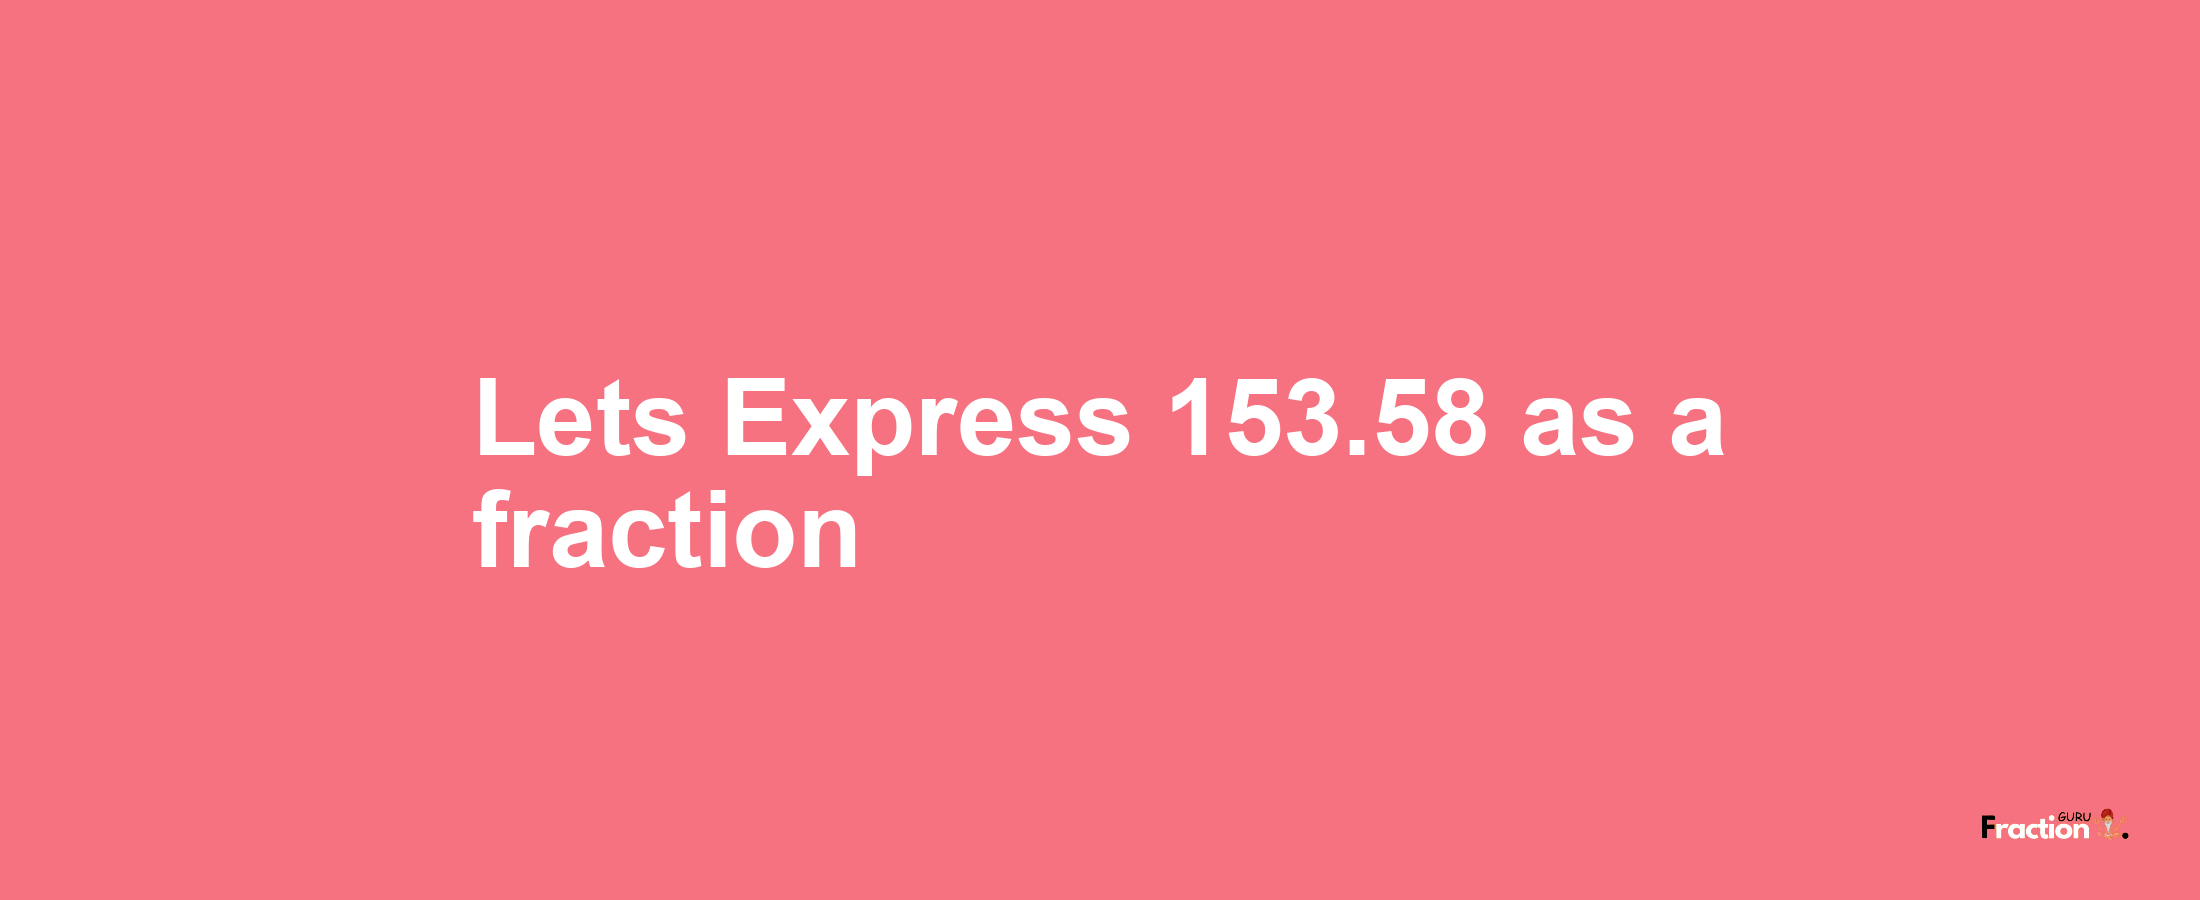 Lets Express 153.58 as afraction